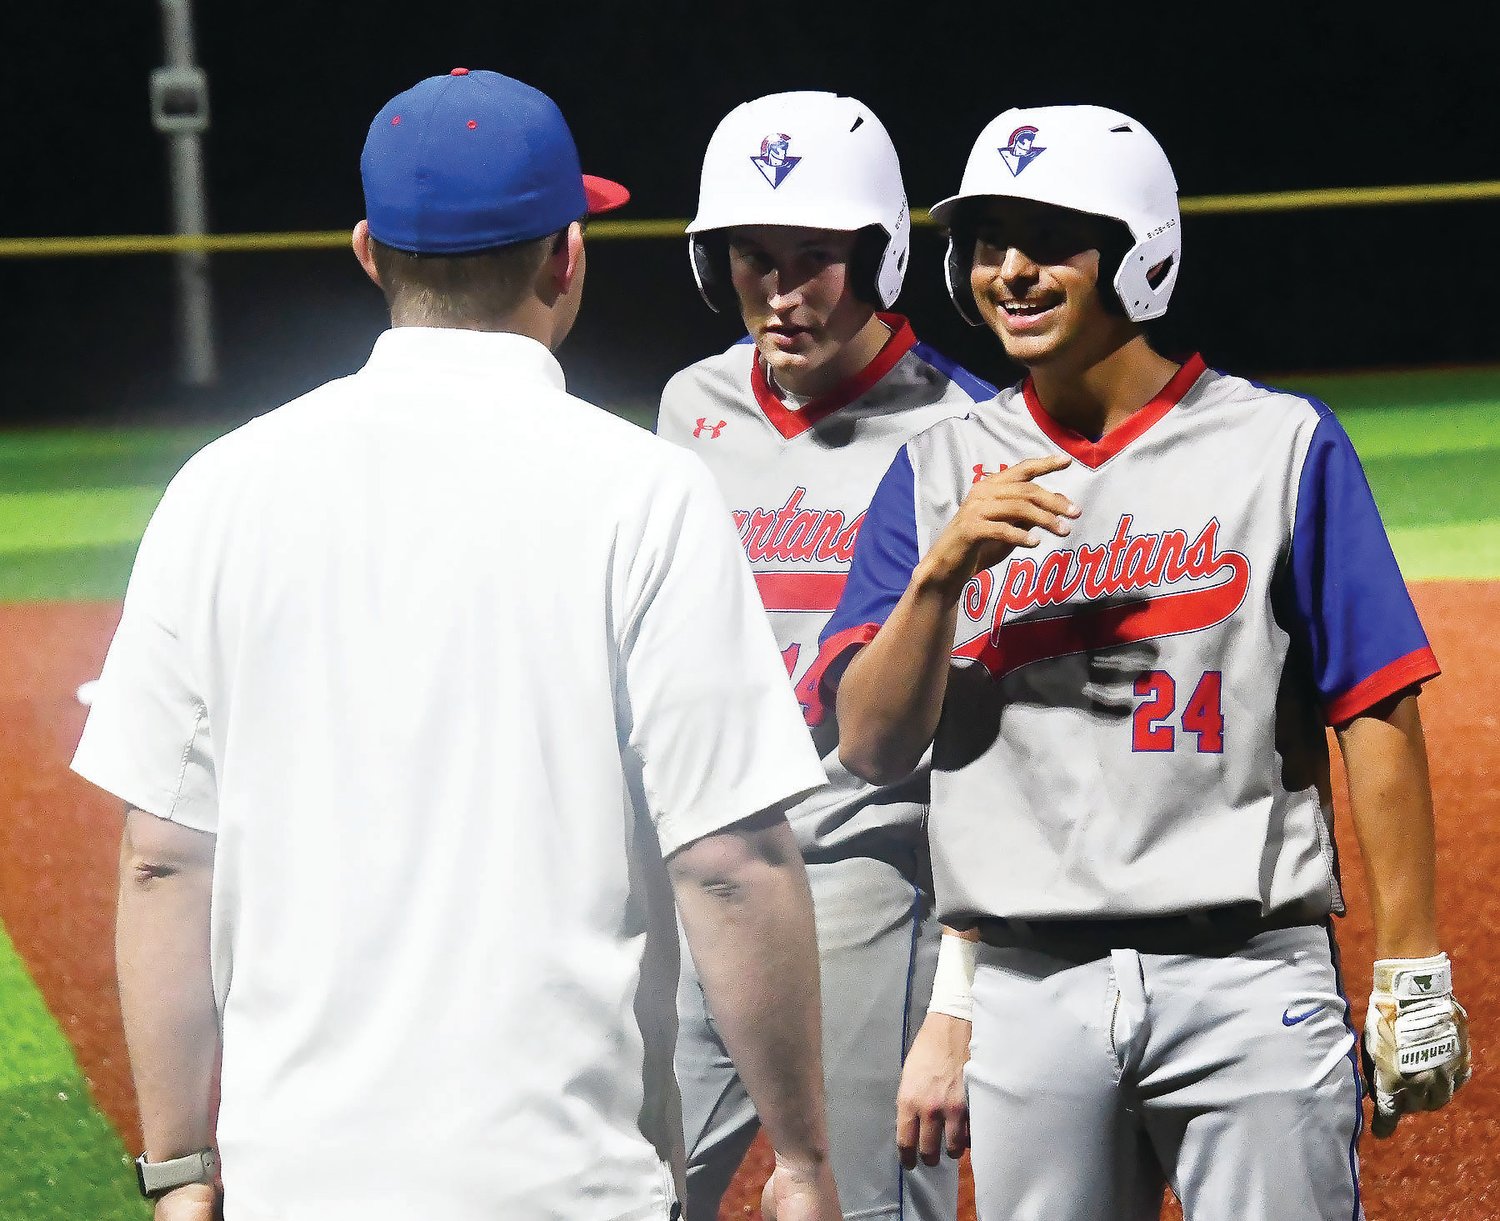 Moberly baseball players Connor Tenney (14) and Chris Coonce (24) share a laugh with head coach Tony Vestal during Monday's Class 4 District 7 championship game. Tenney and Coonce played their final scholastic contest.